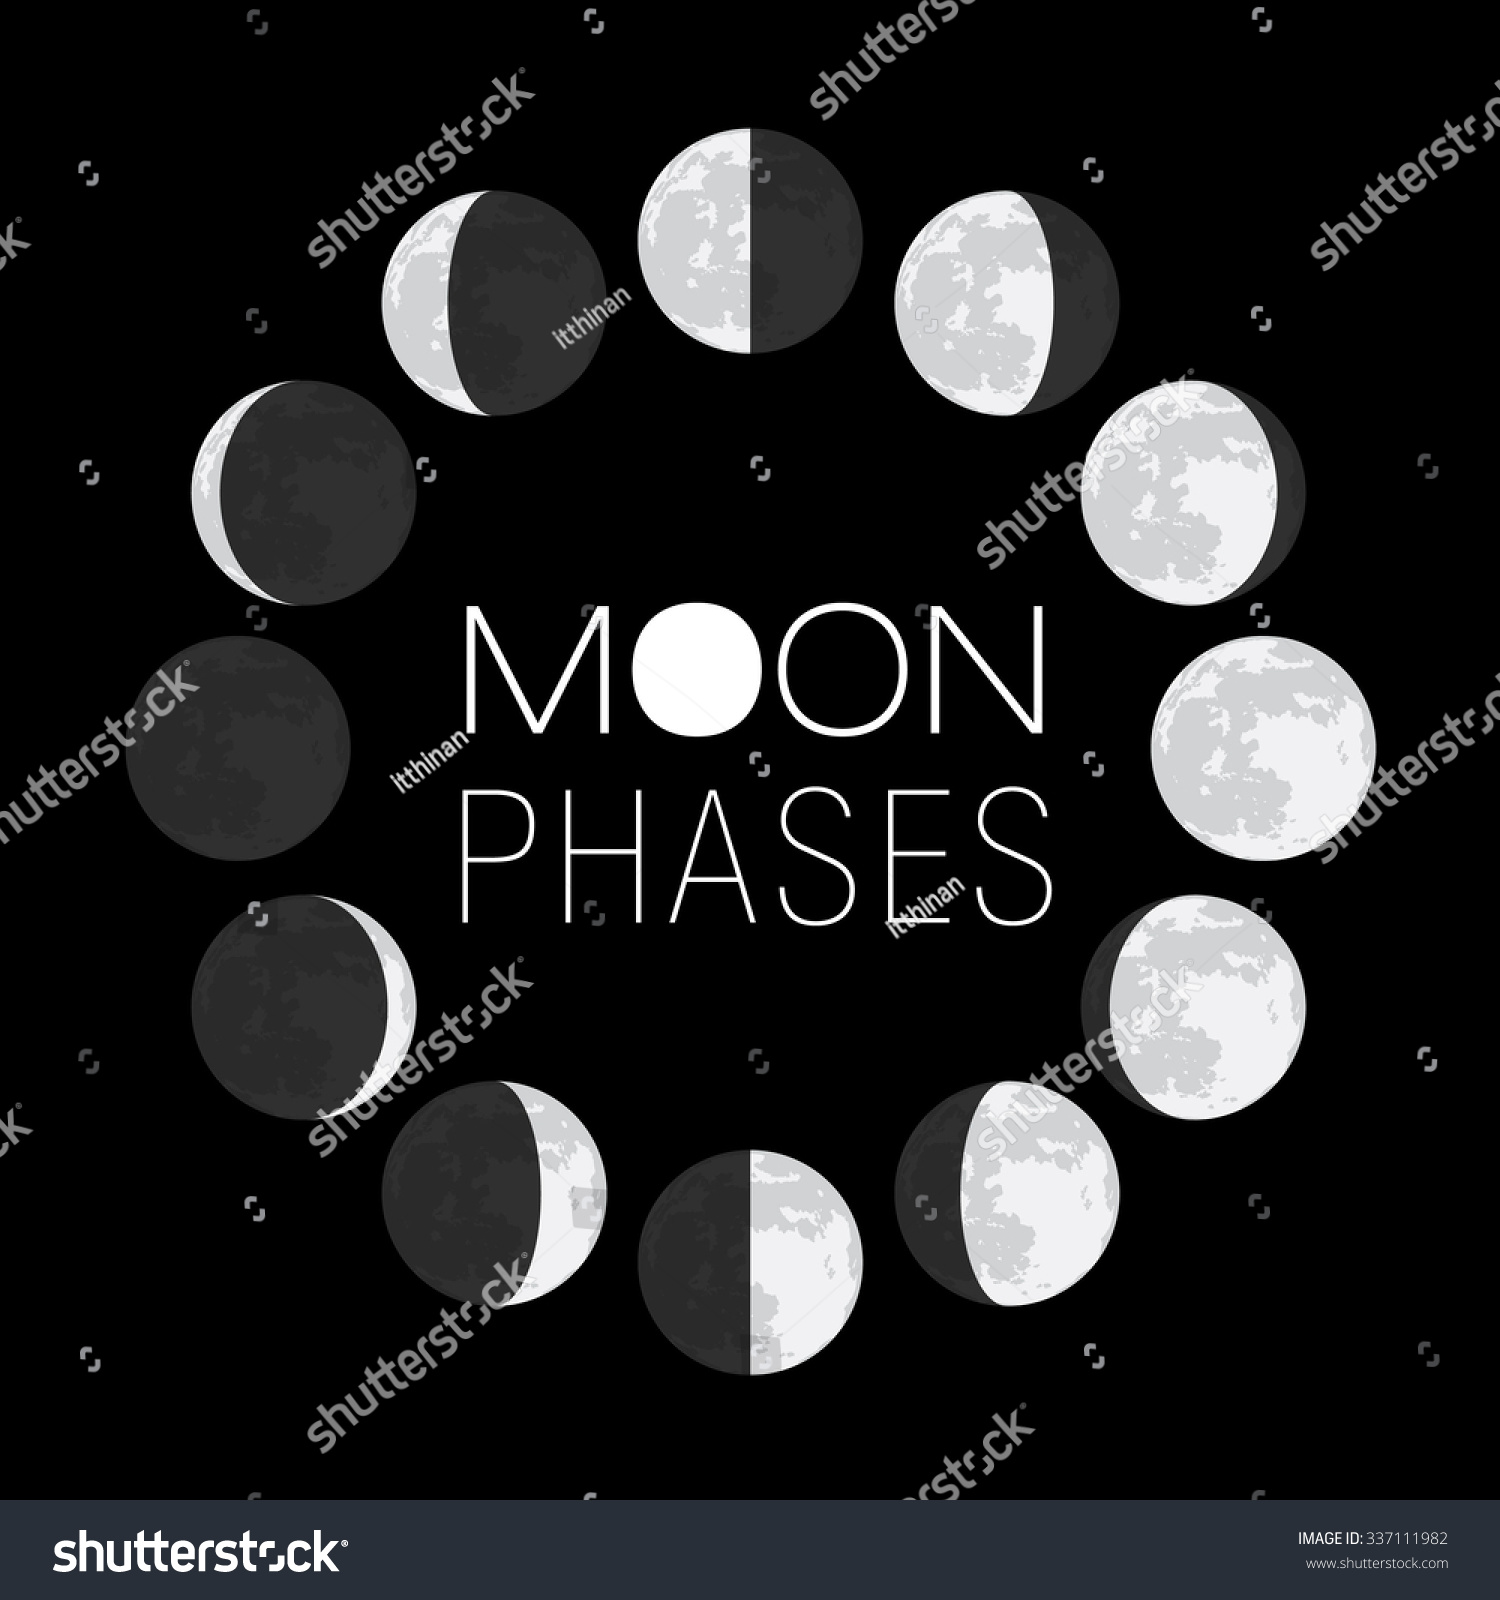 4 keys to understanding moon phases